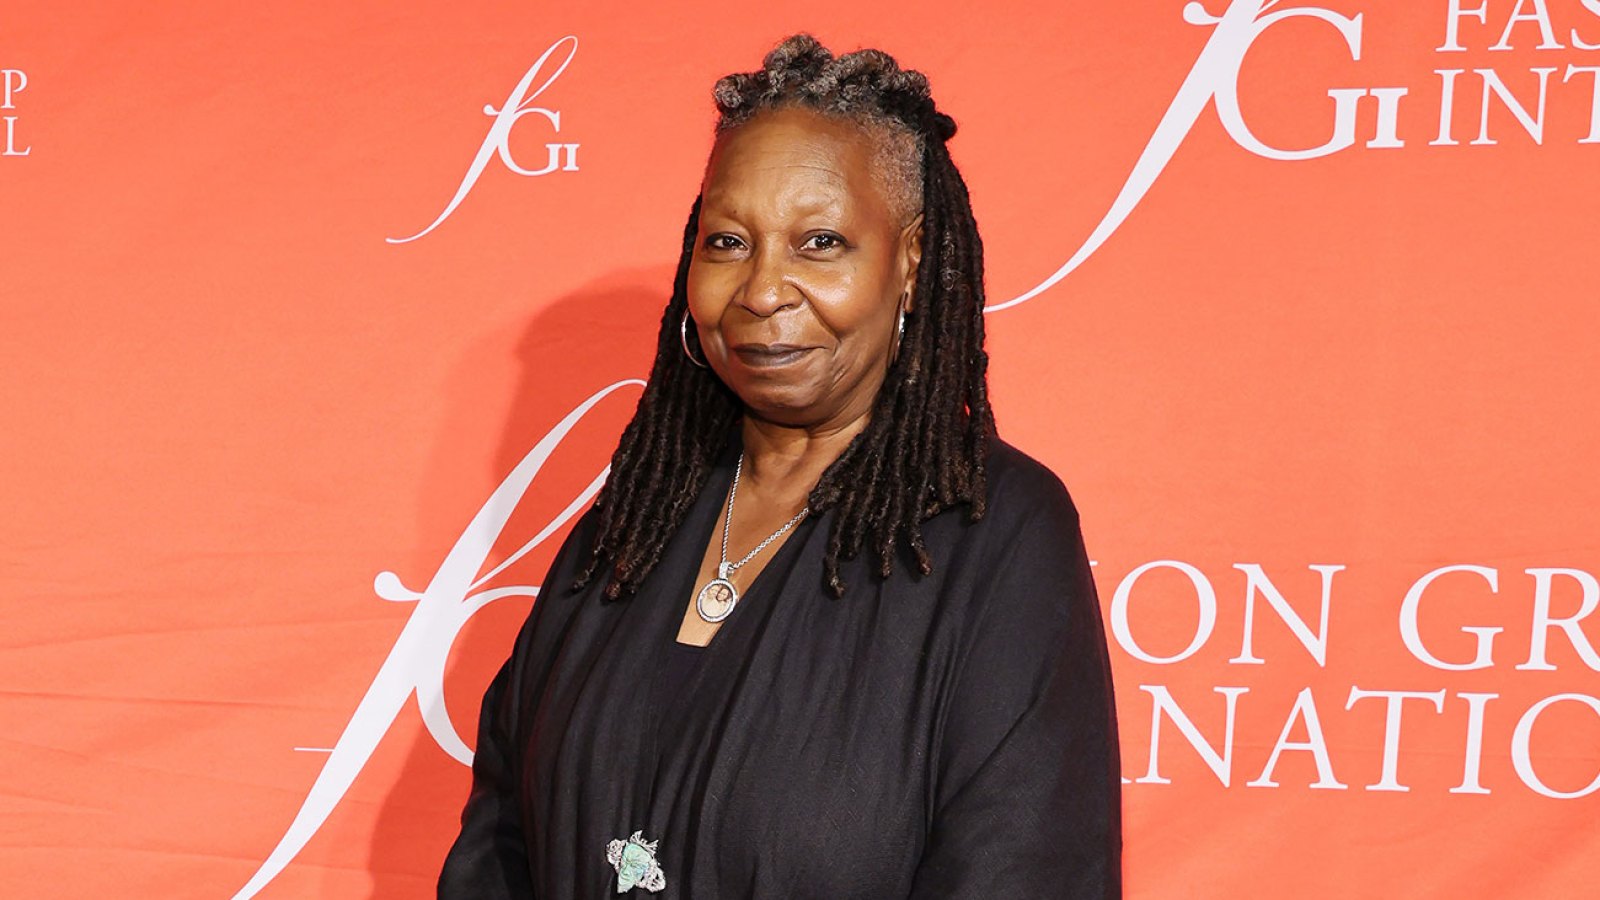 Feature Whoopi Goldberg Bits and Pieces Memoir Reveals Her Past Drug Addiction and Famous Friendships